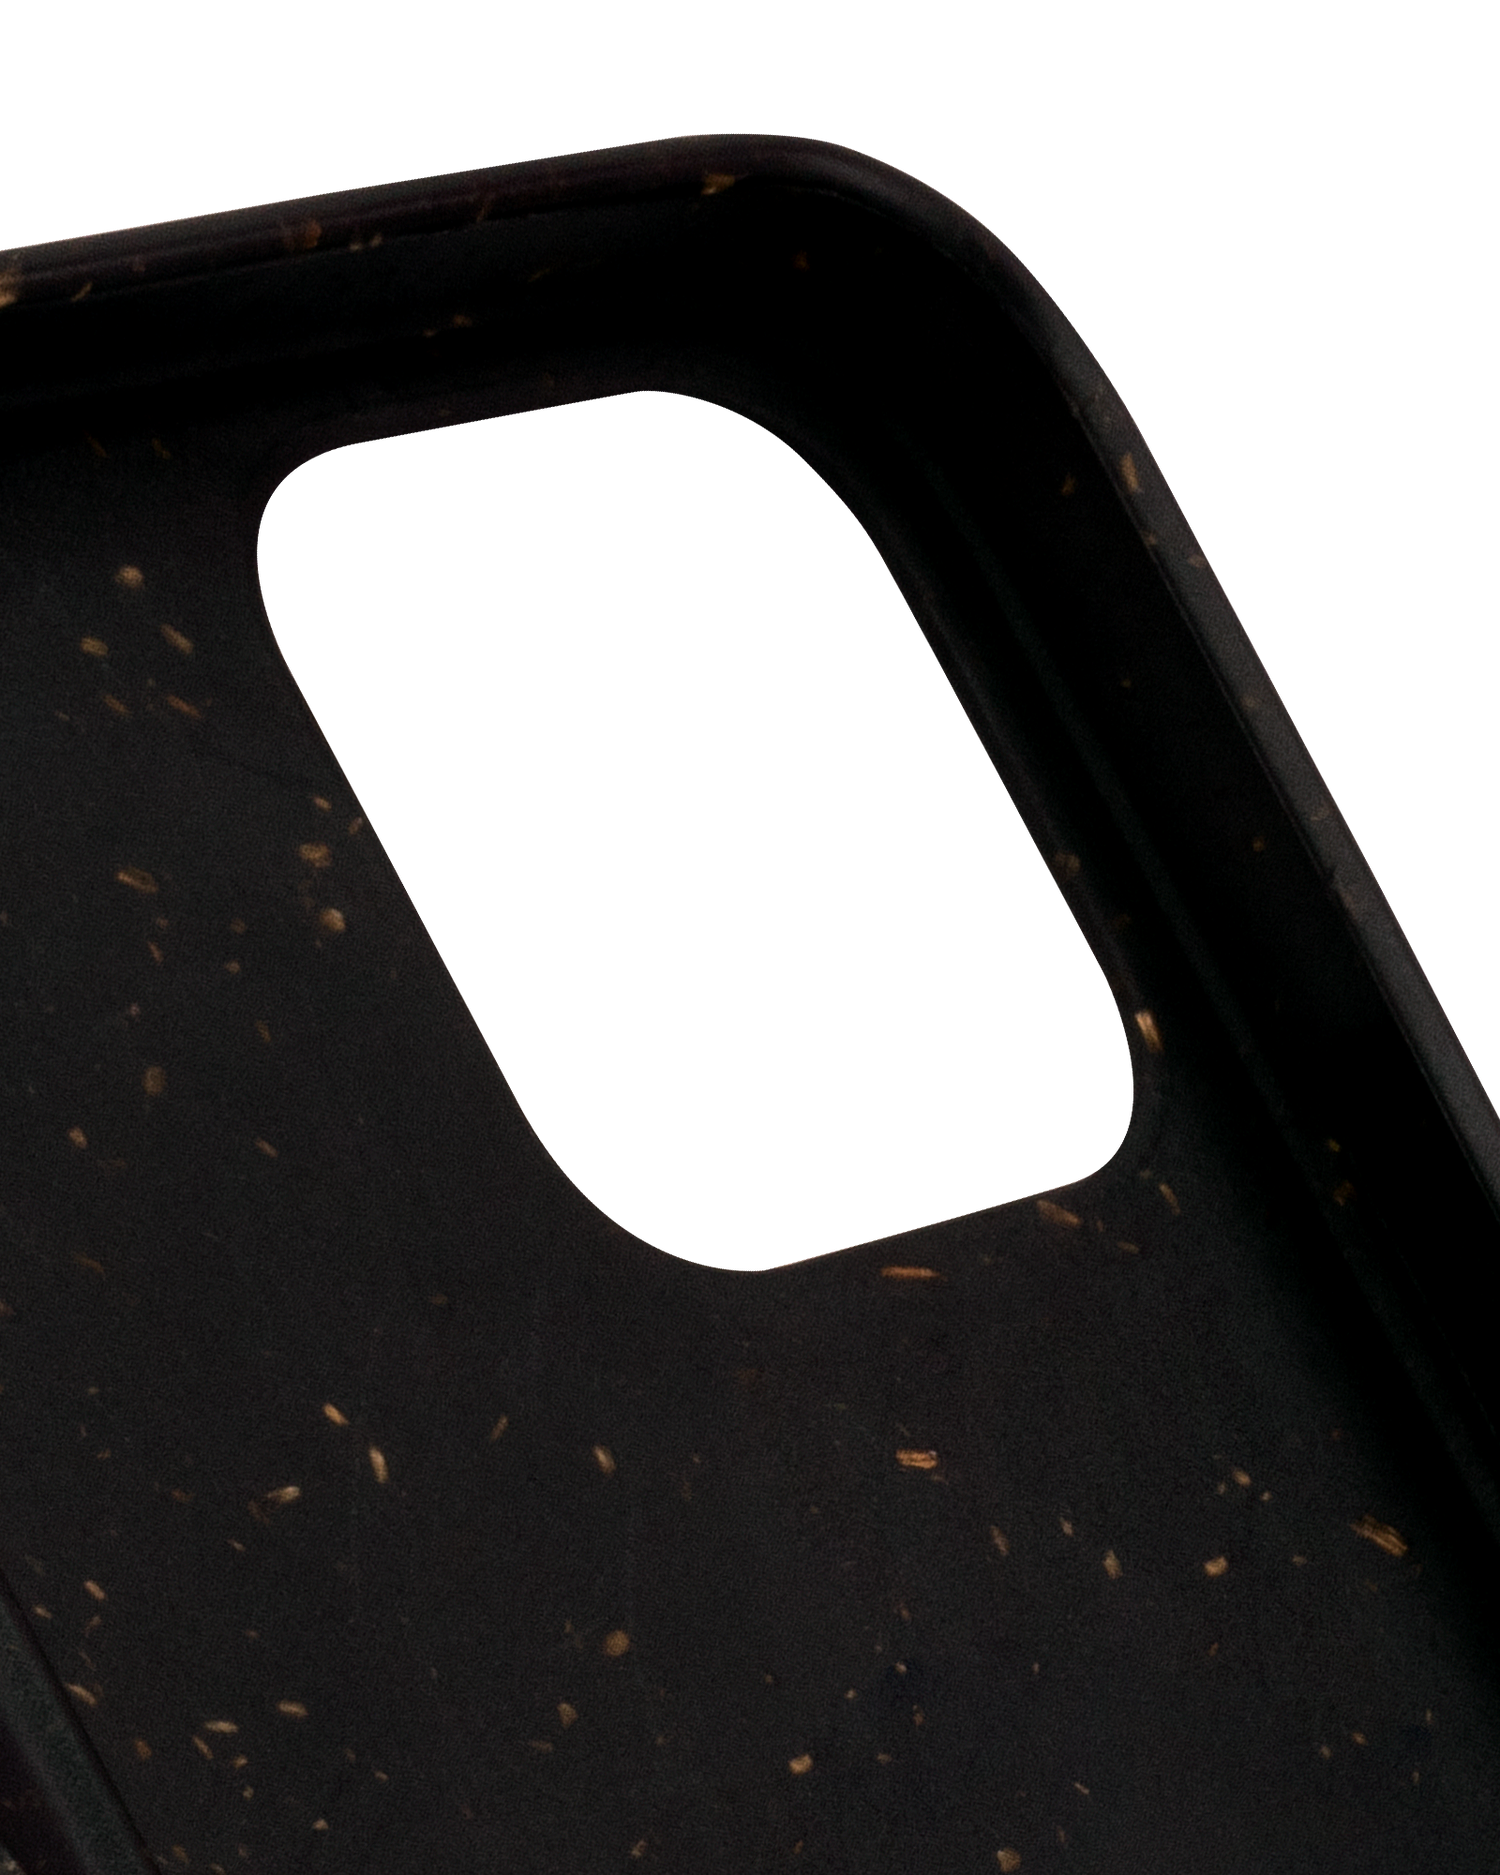 Black Eco-Friendly Phone Case for Apple iPhone 12 Pro Max: Details inside